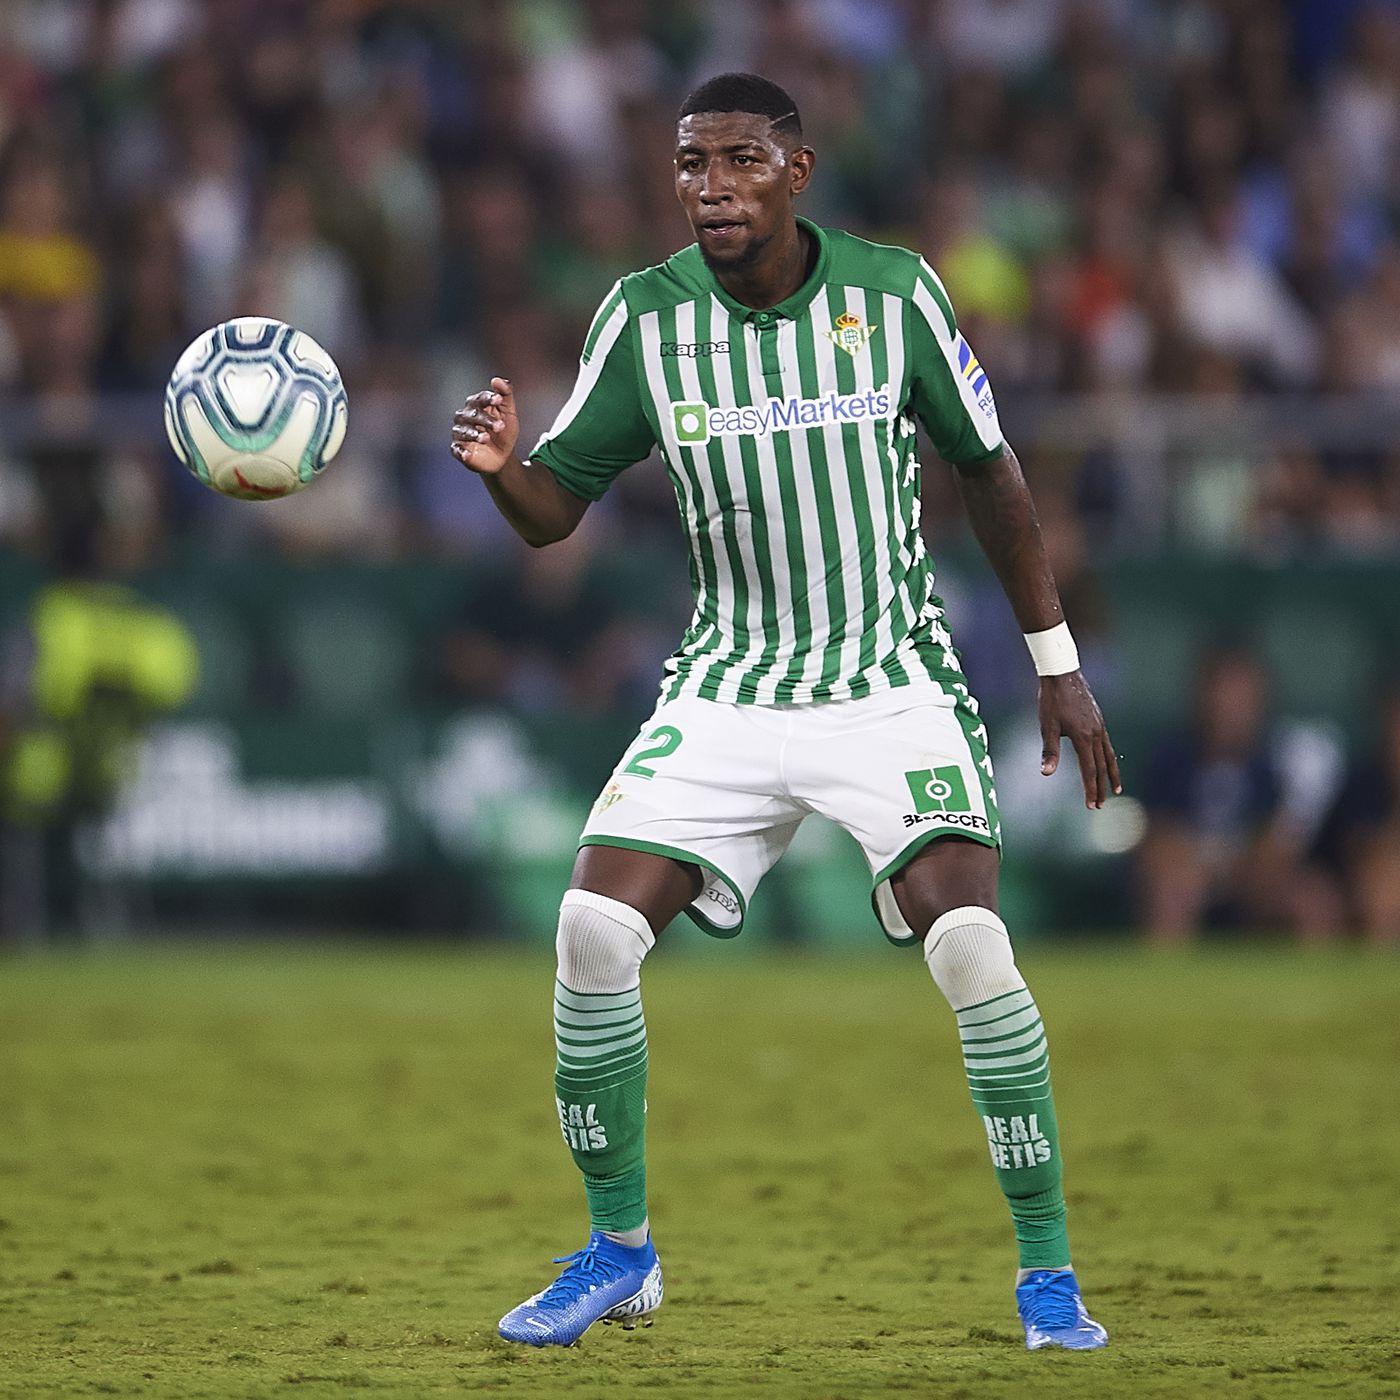 Emerson says he's ready to play for Barcelona - Barca Blaugranes